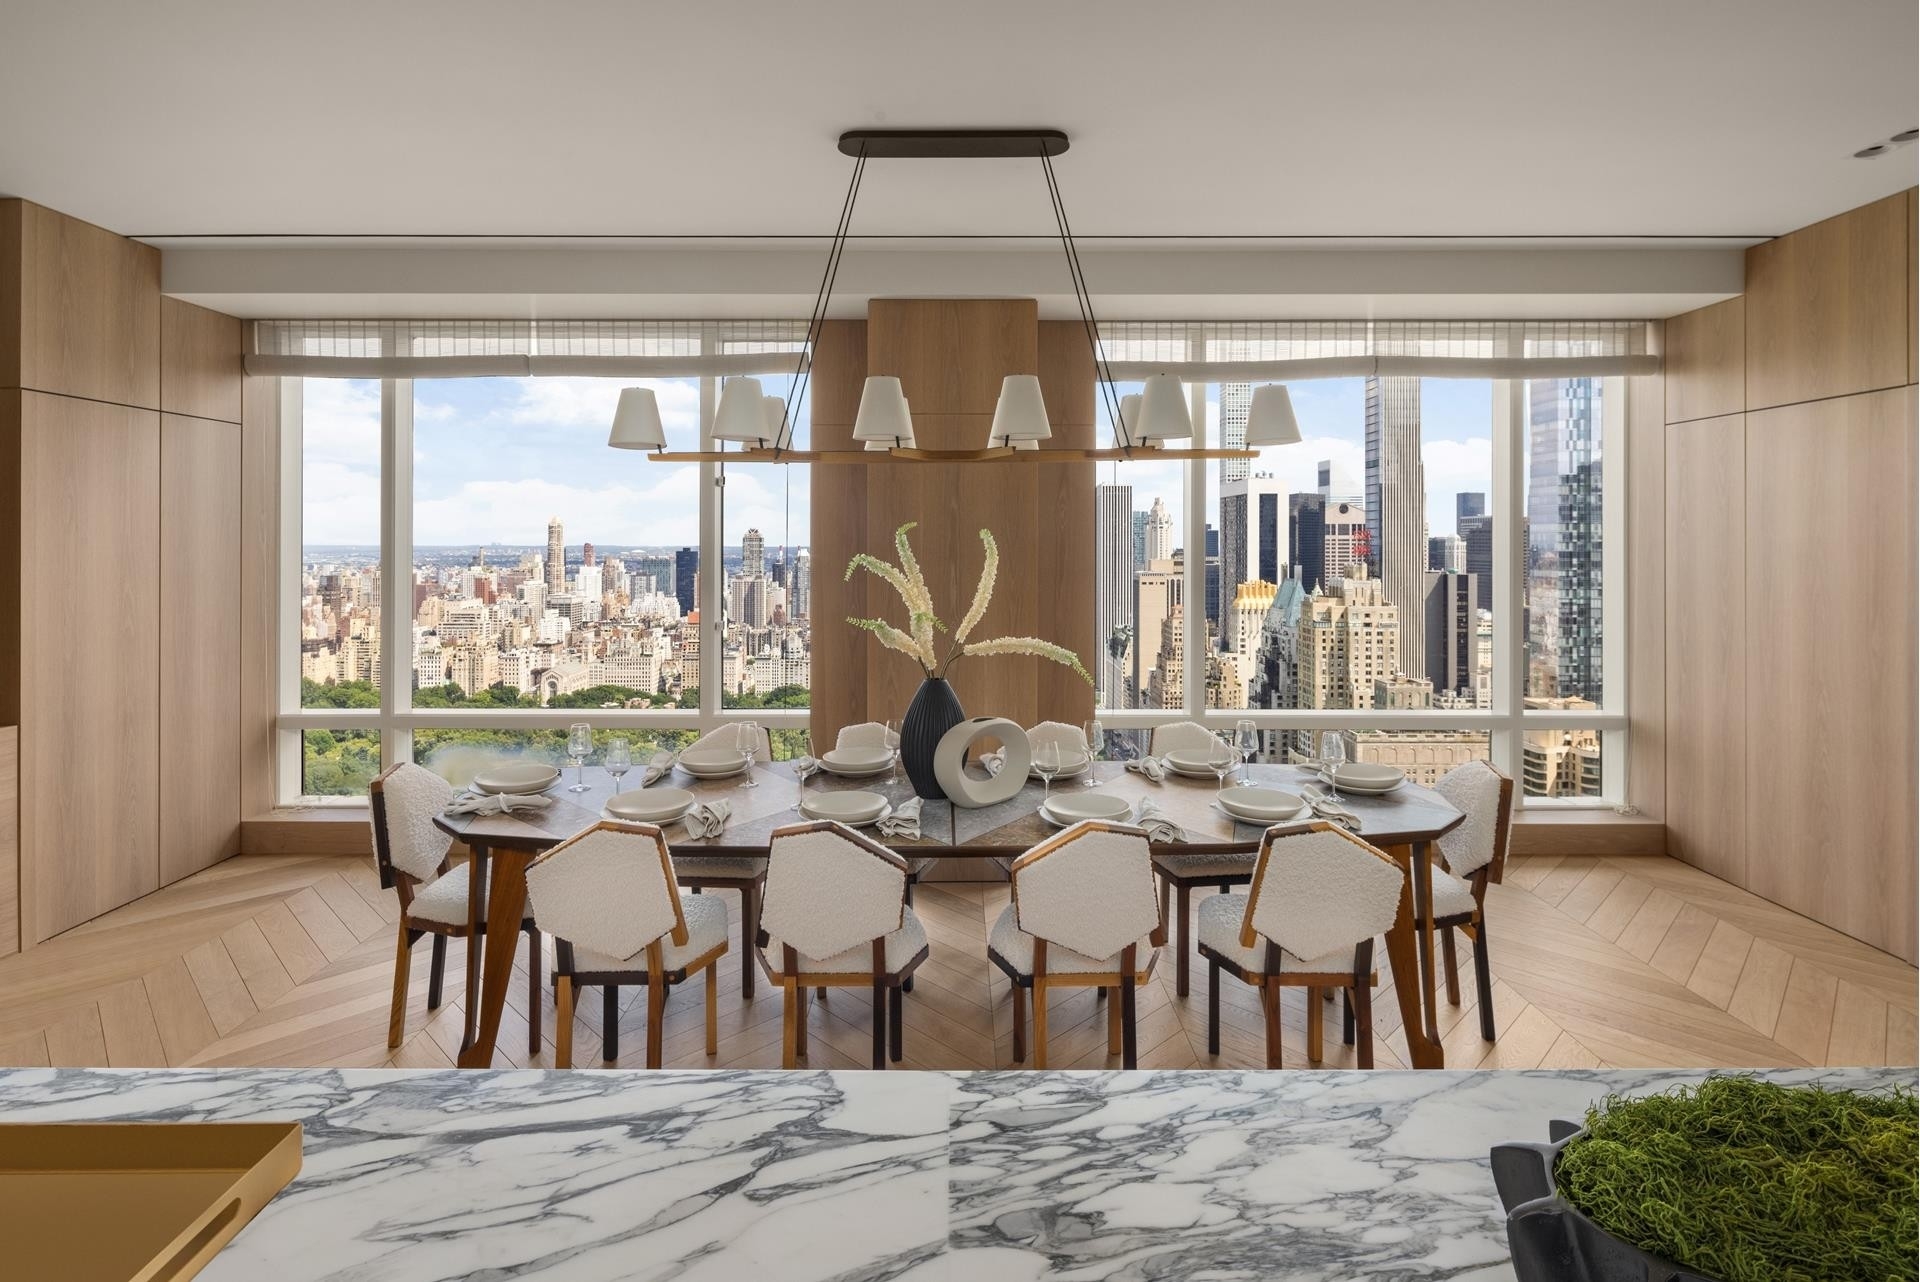 Condominium for Sale at One Central Park West, 1 CENTRAL PARK W, 47BC Lincoln Square, New York, New York 10023